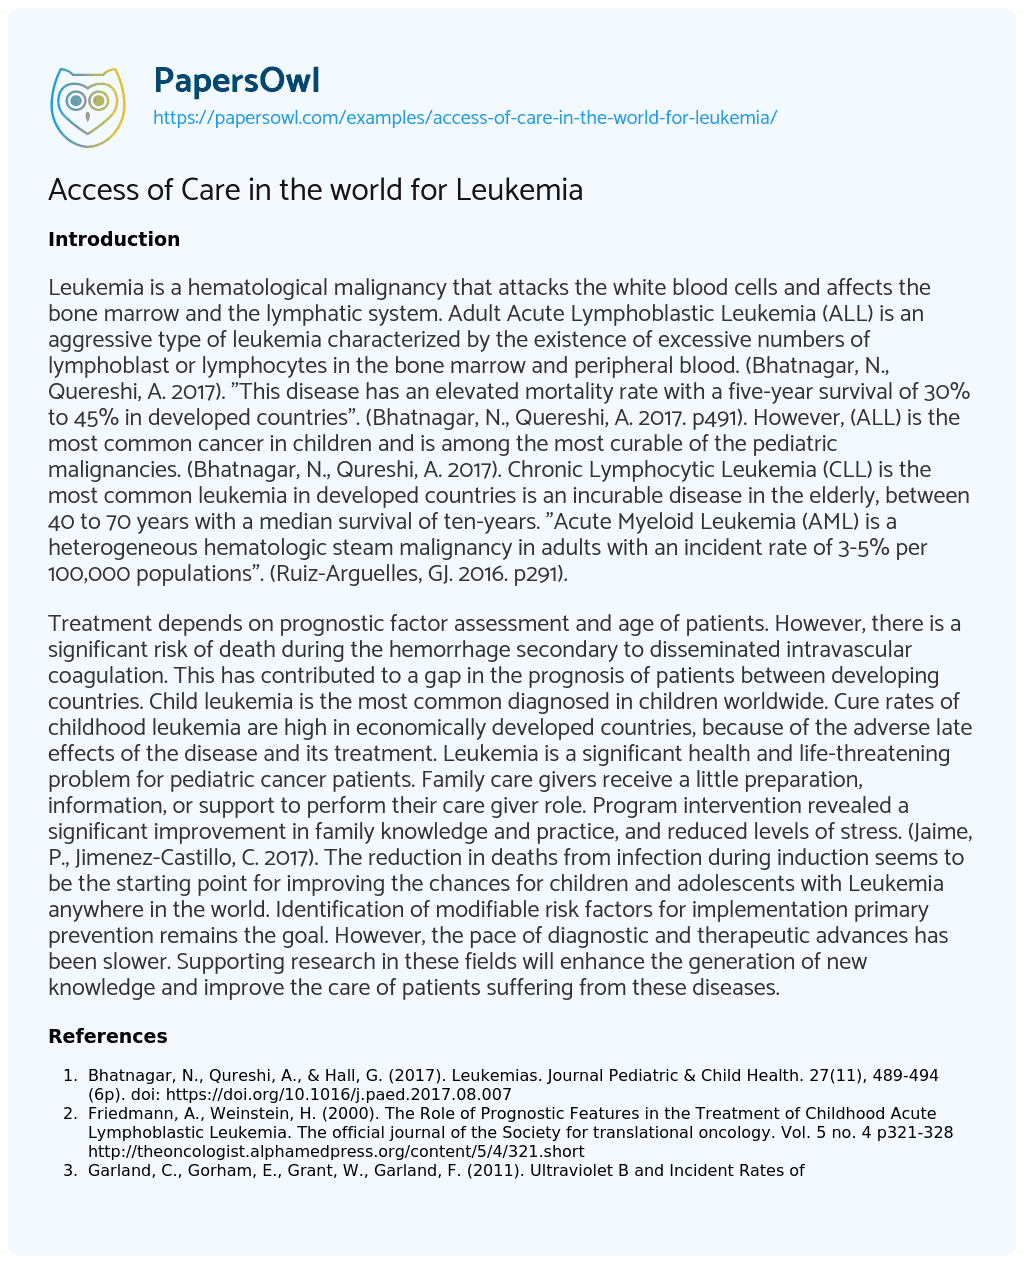 Essay on Access of Care in the World for Leukemia